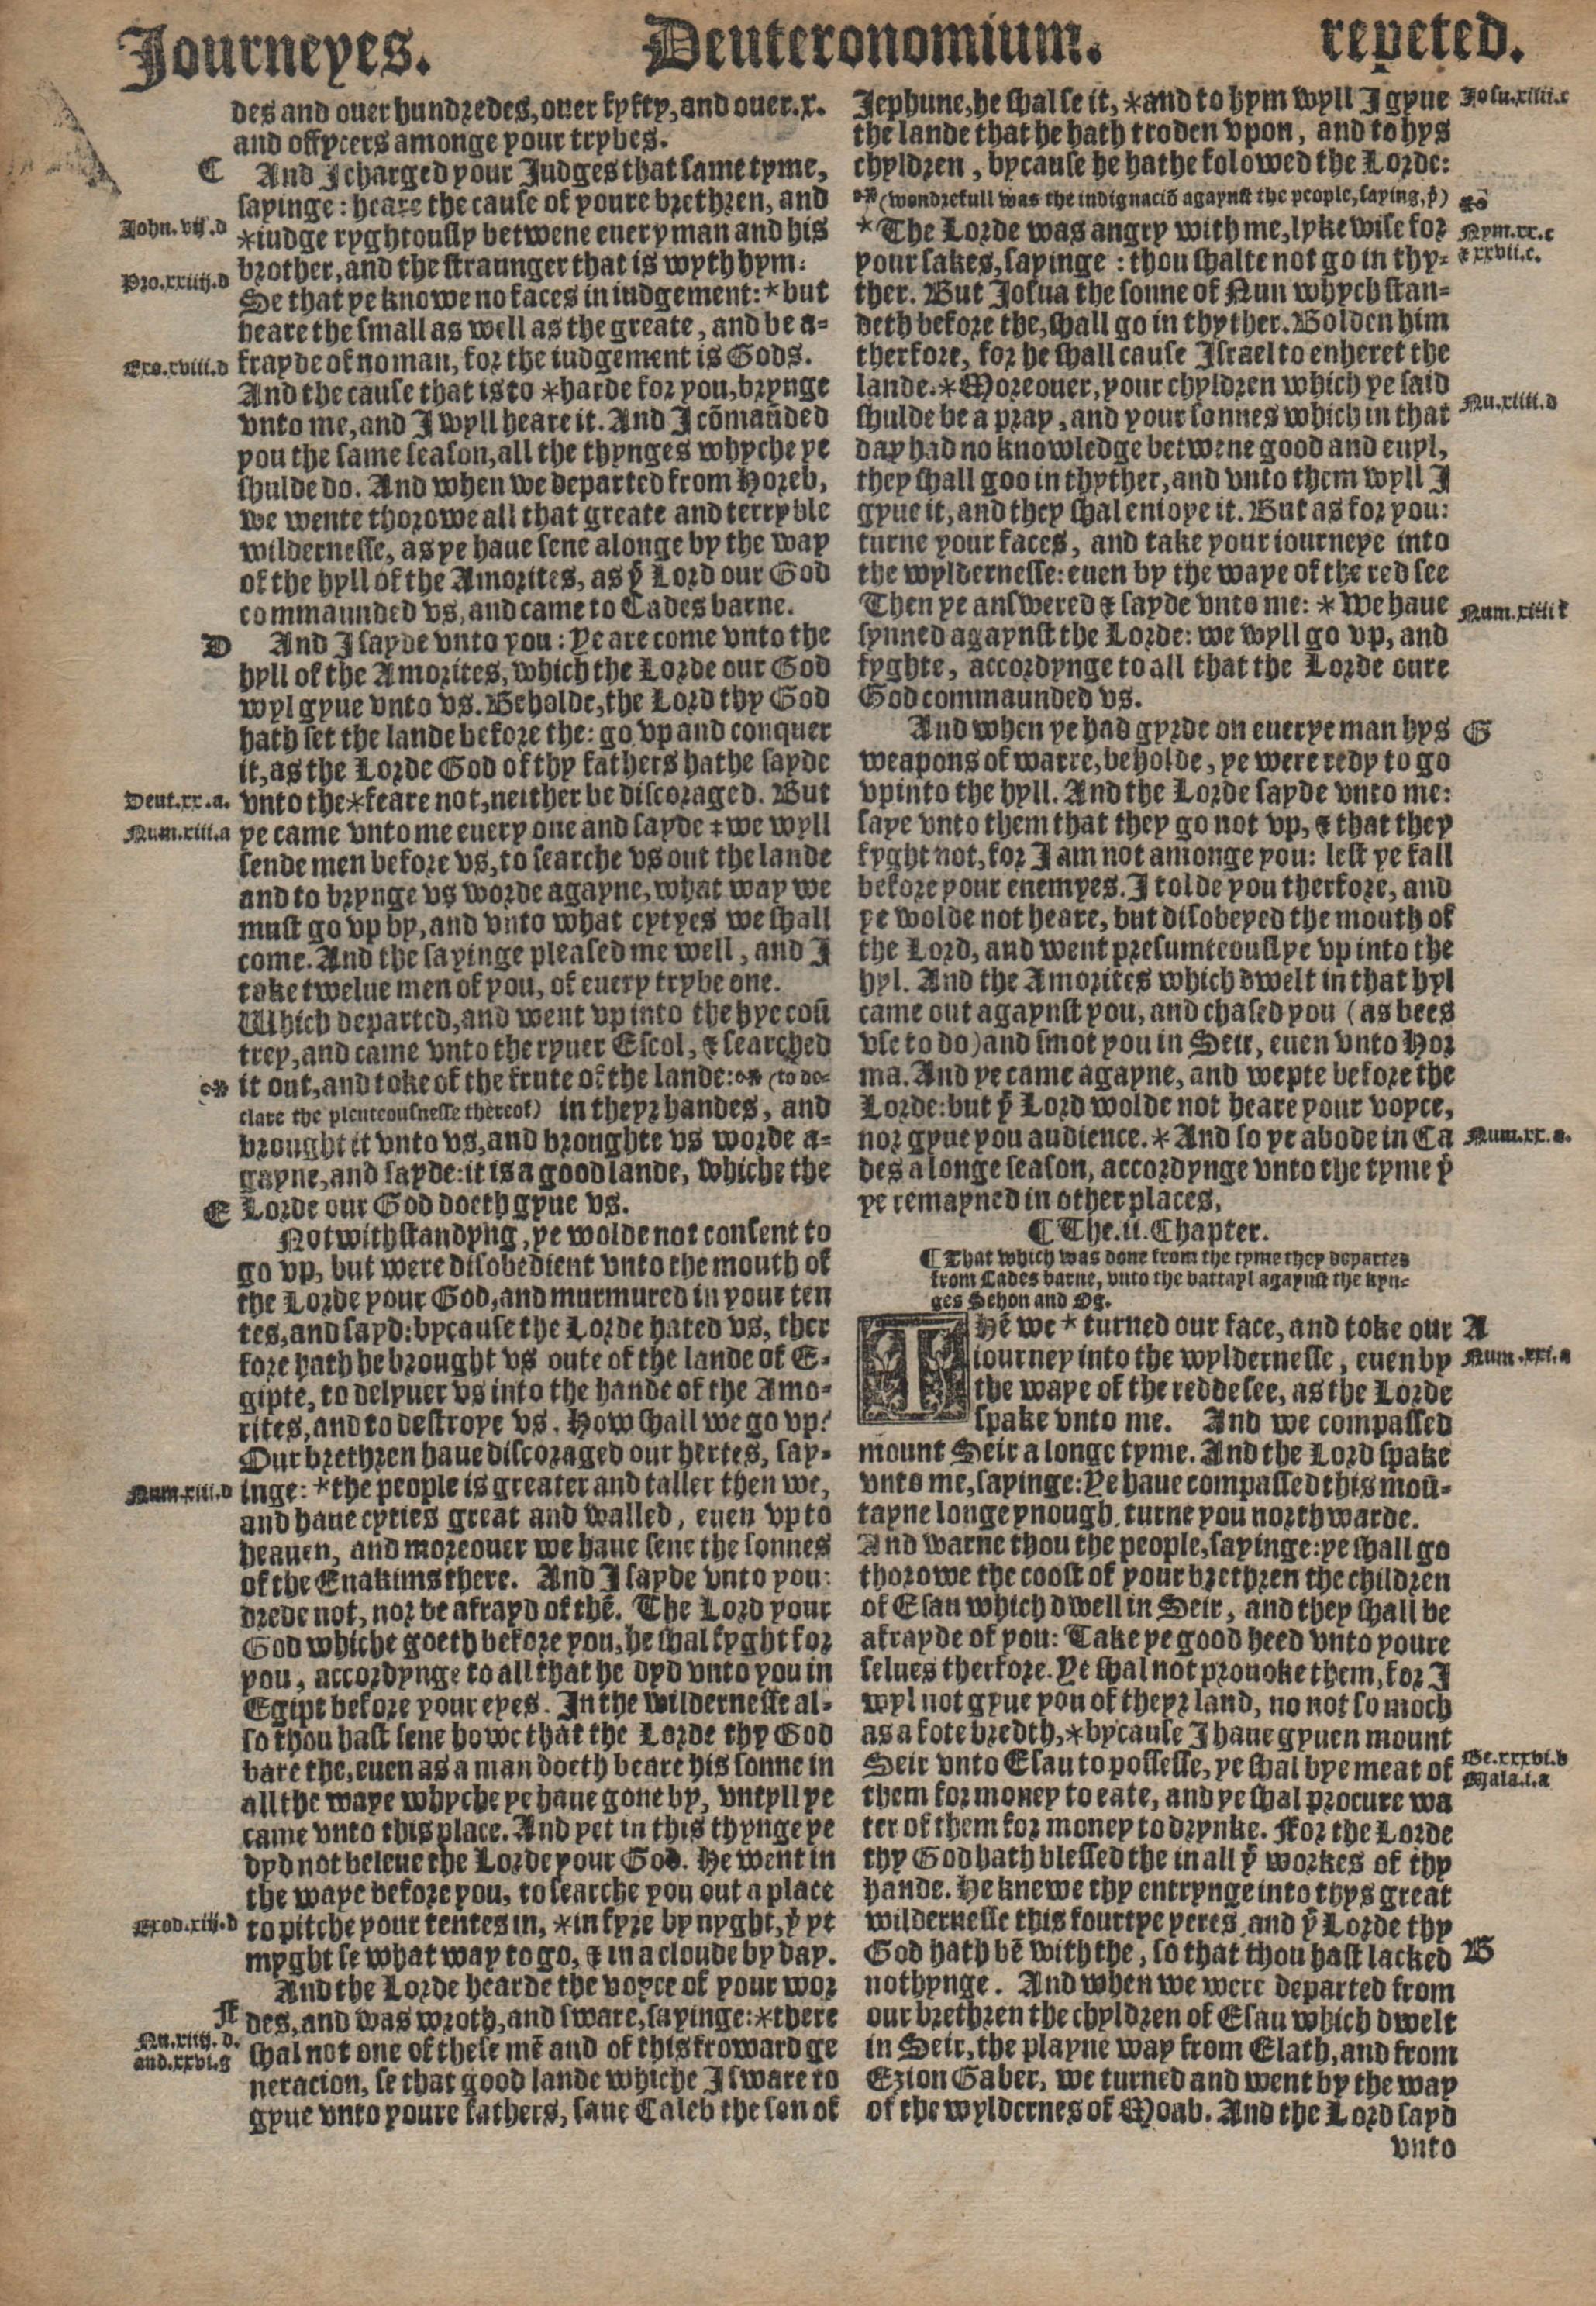 British Deuteronomy, Complete Book from the 1540 